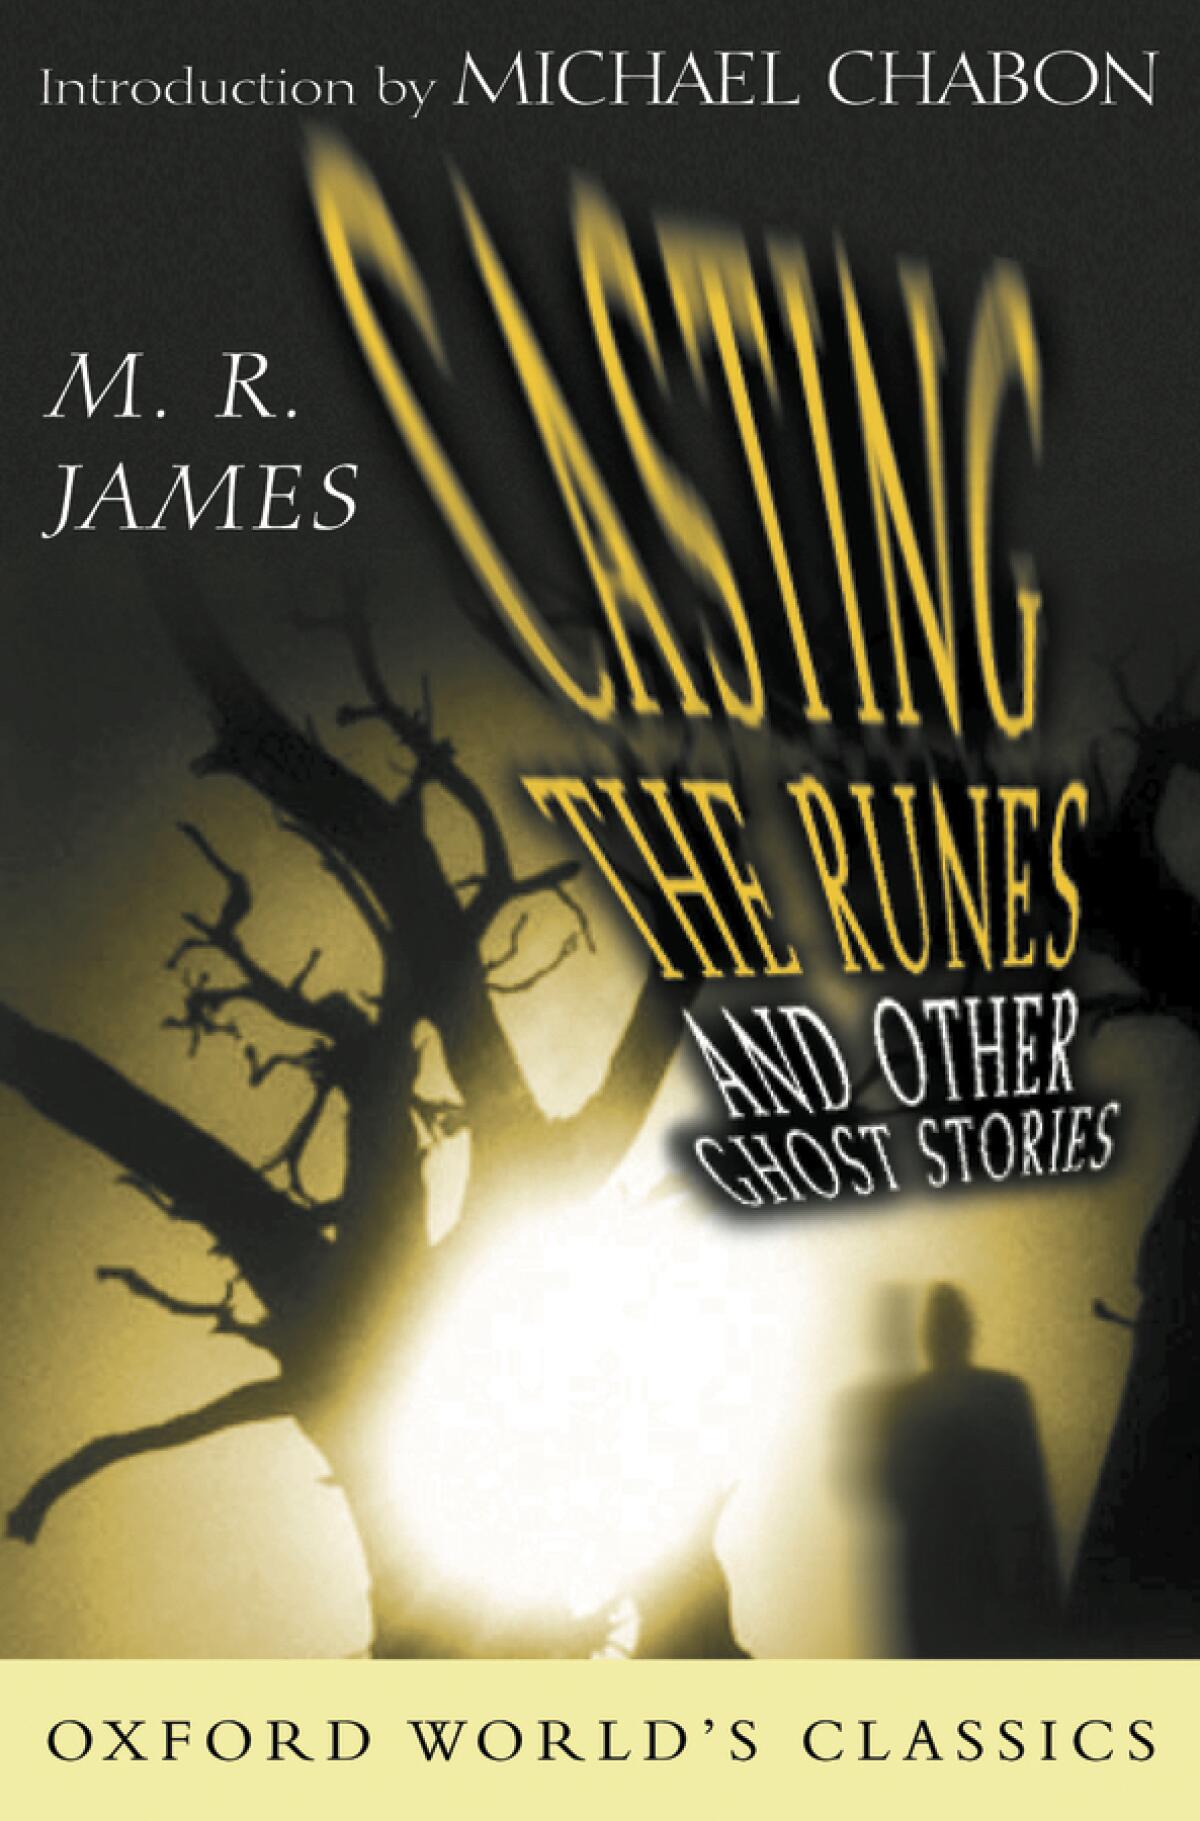 A book cover featuring silhouettes of a tree and a mysterious figure.